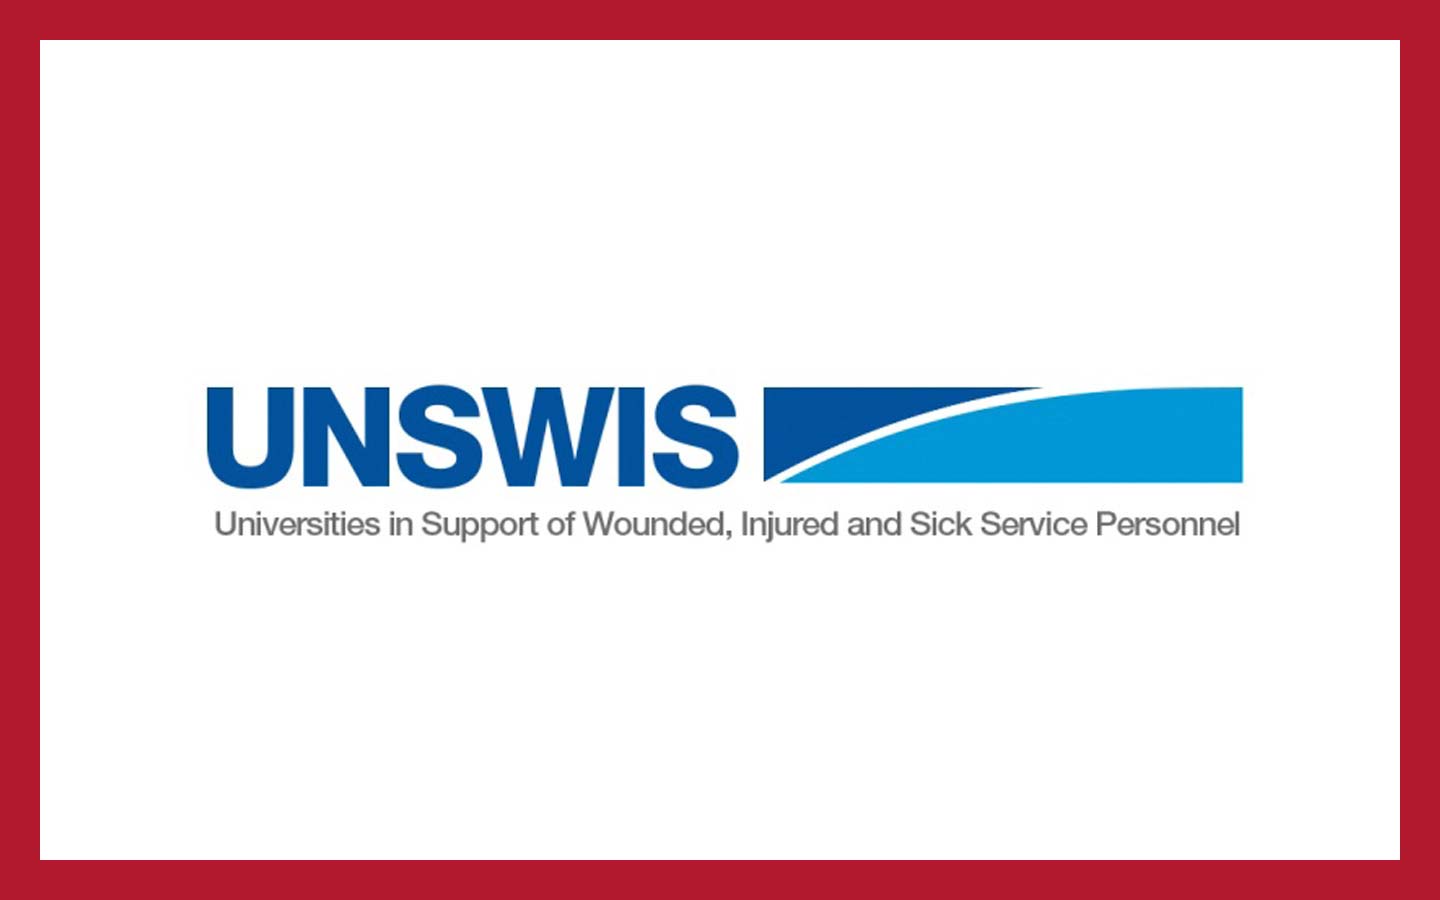 Armed Forces - UNSWIS